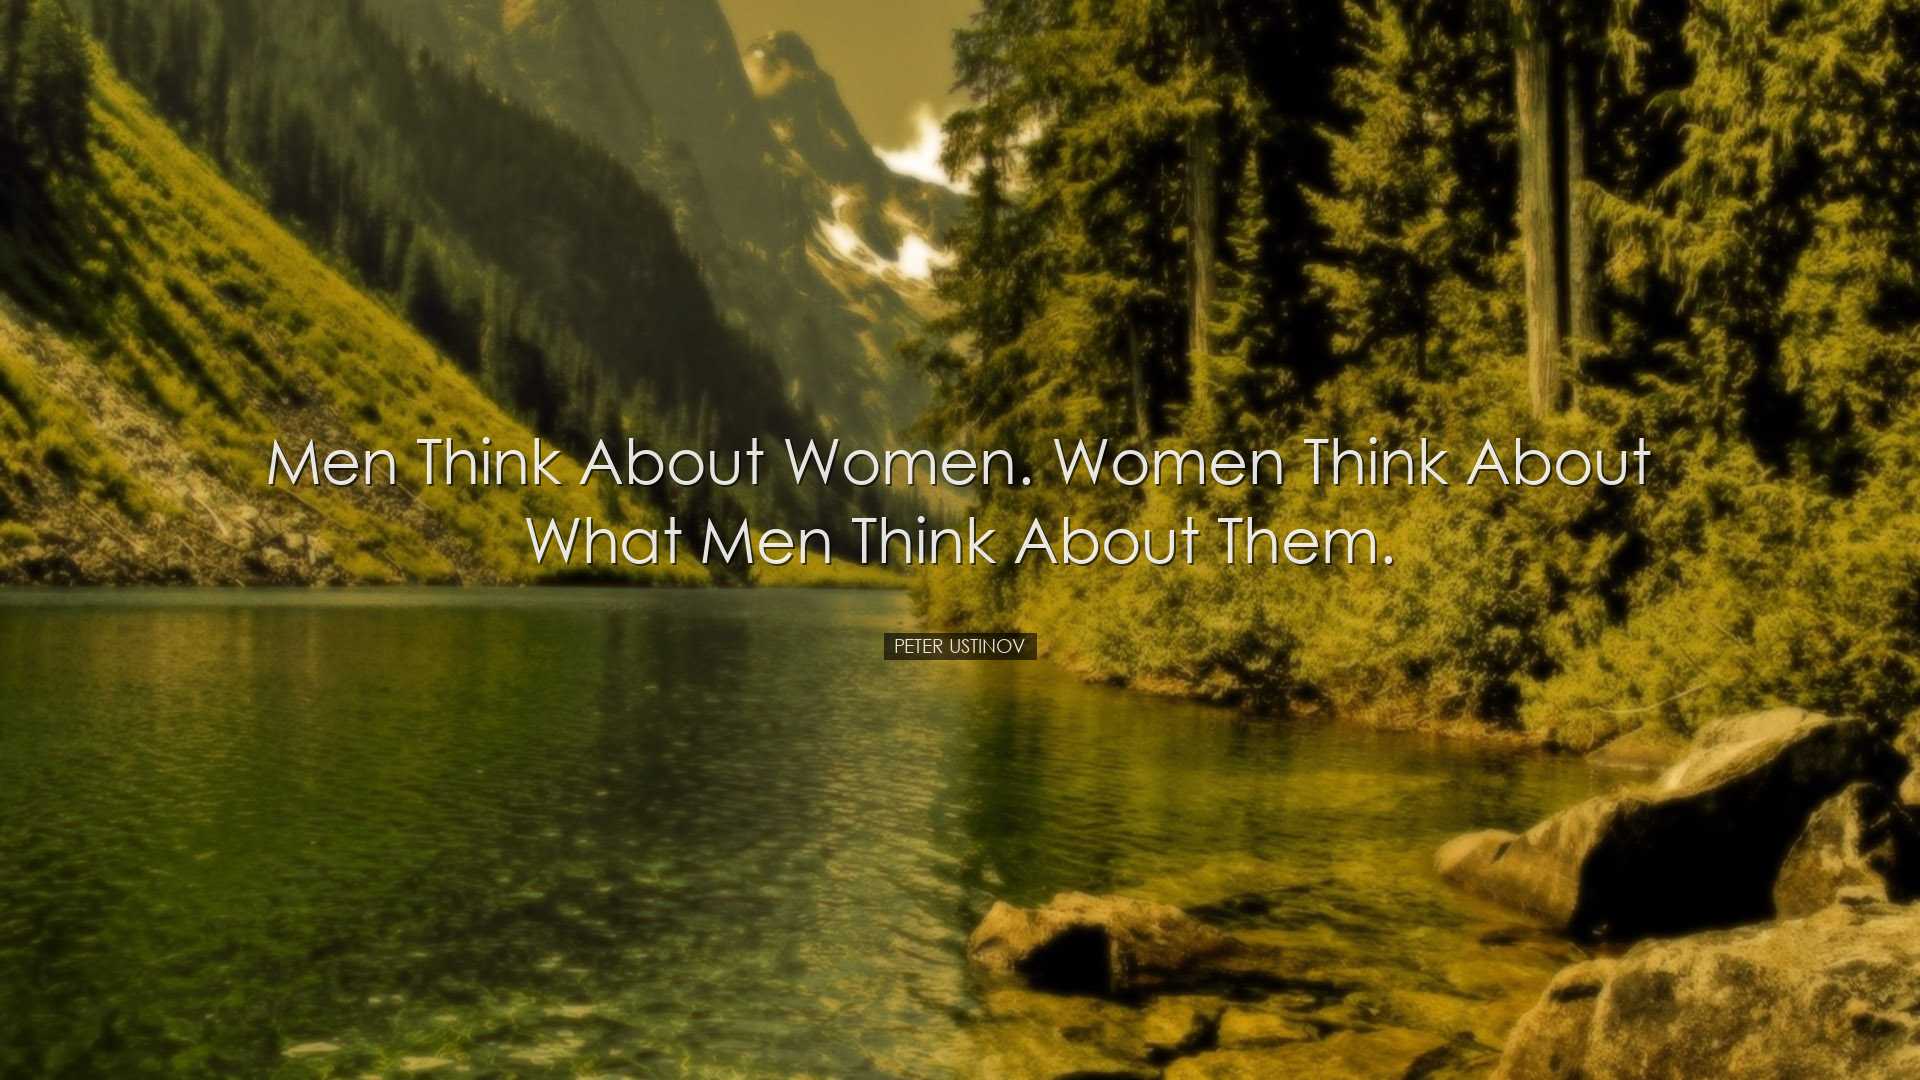 Men think about women. Women think about what men think about them